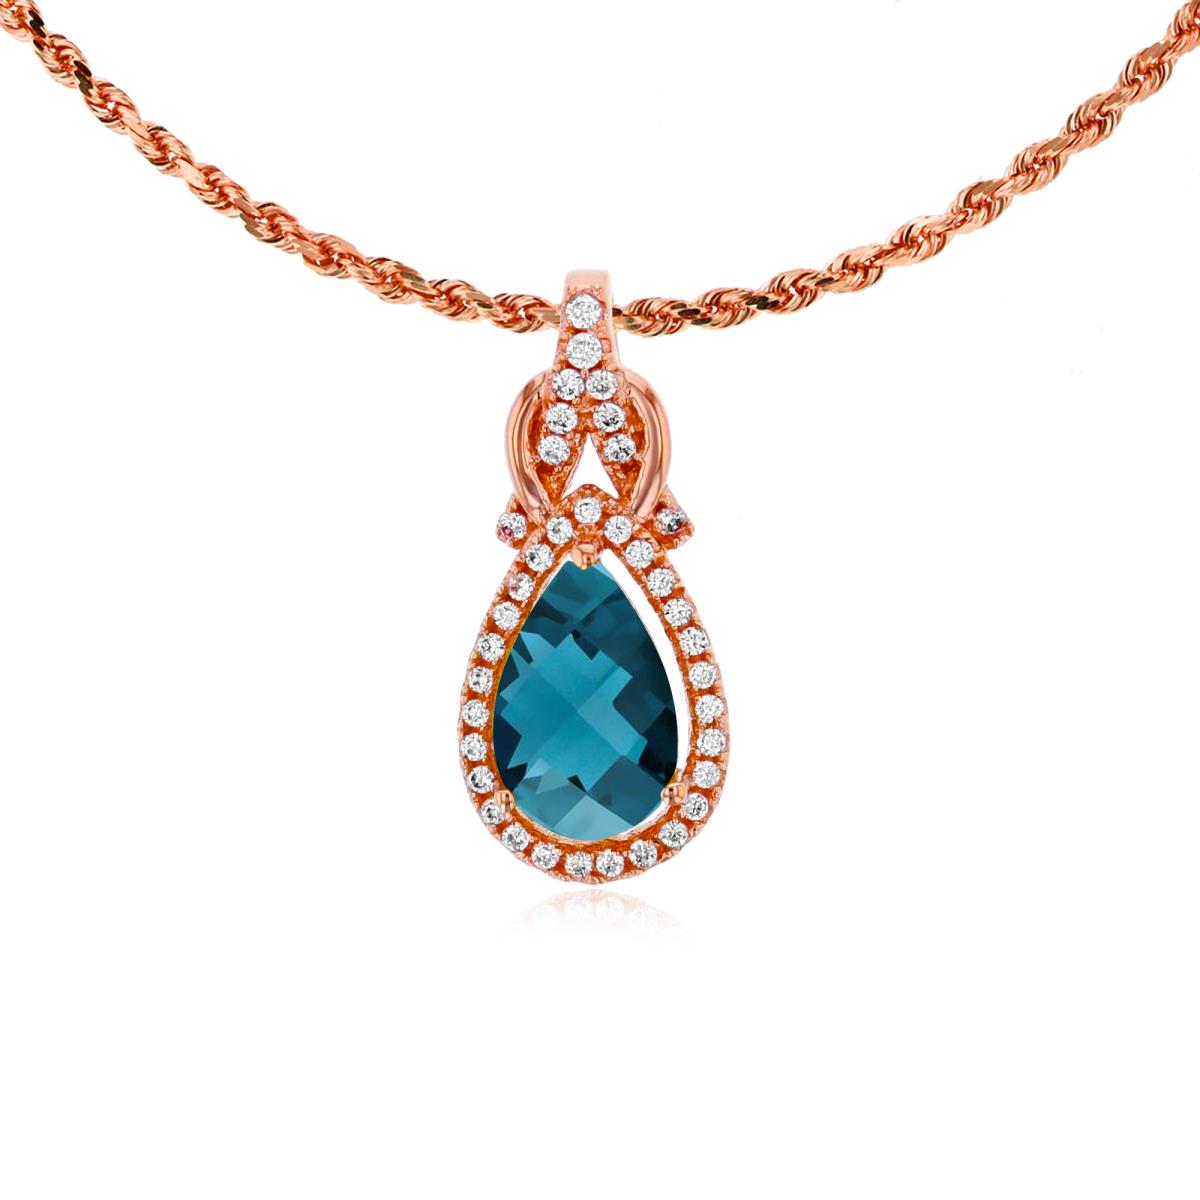 10K Rose Gold 8x5mm Pear Cut London Blue Topaz & 0.11 CTTW Rnd Diamond Knot 18" Rope Chain Necklace